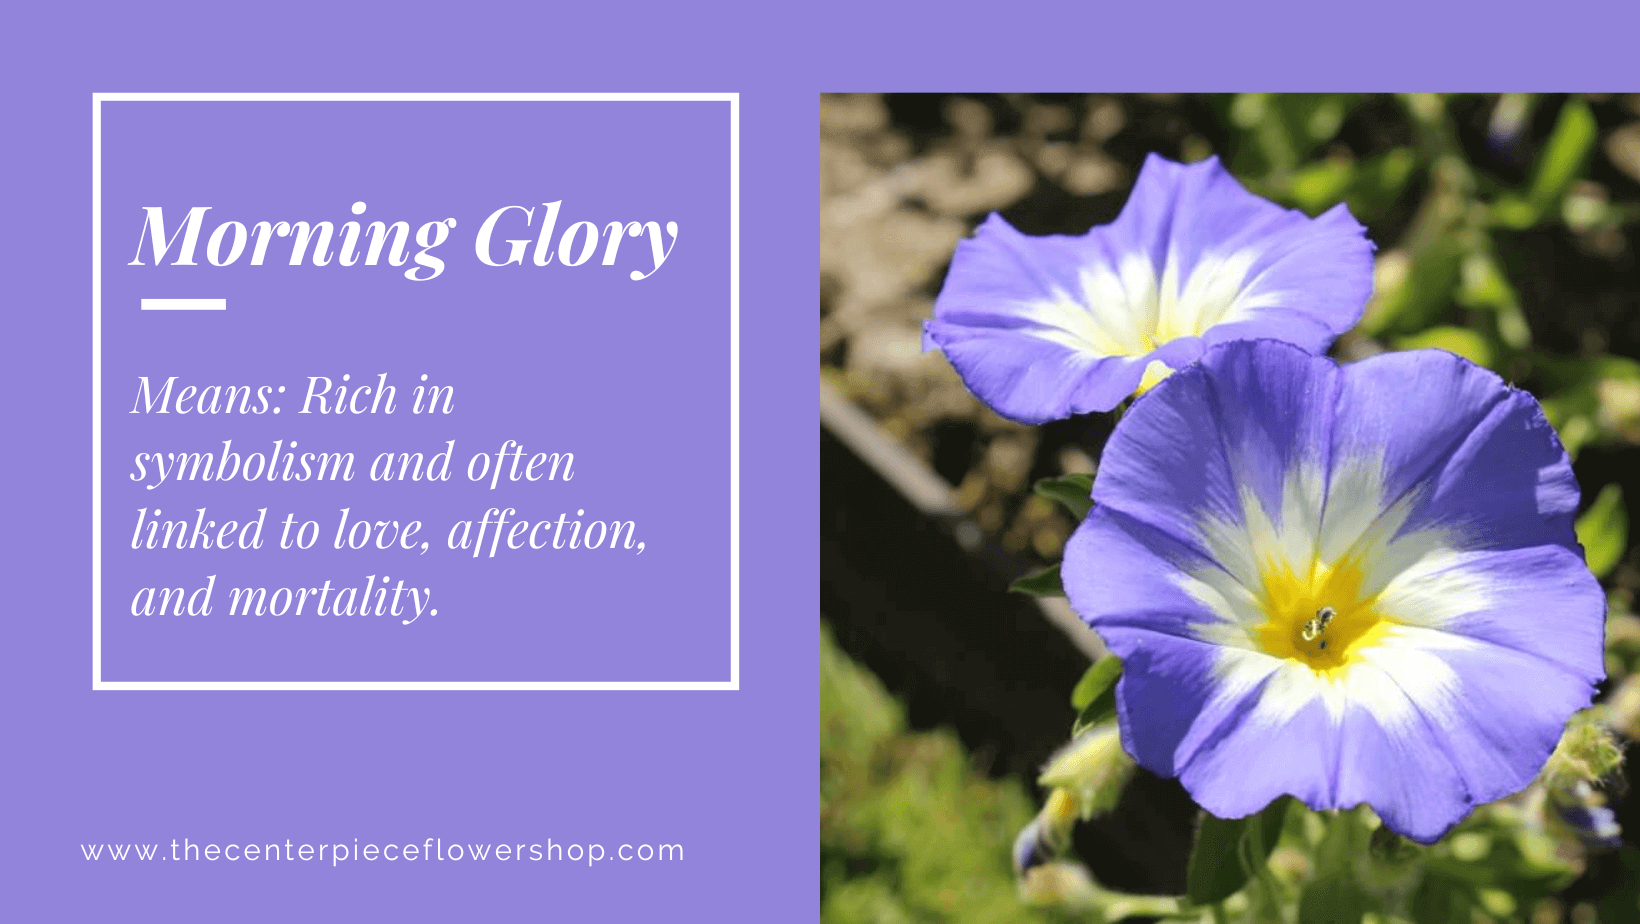 Morning Glory Meaning and symbolism